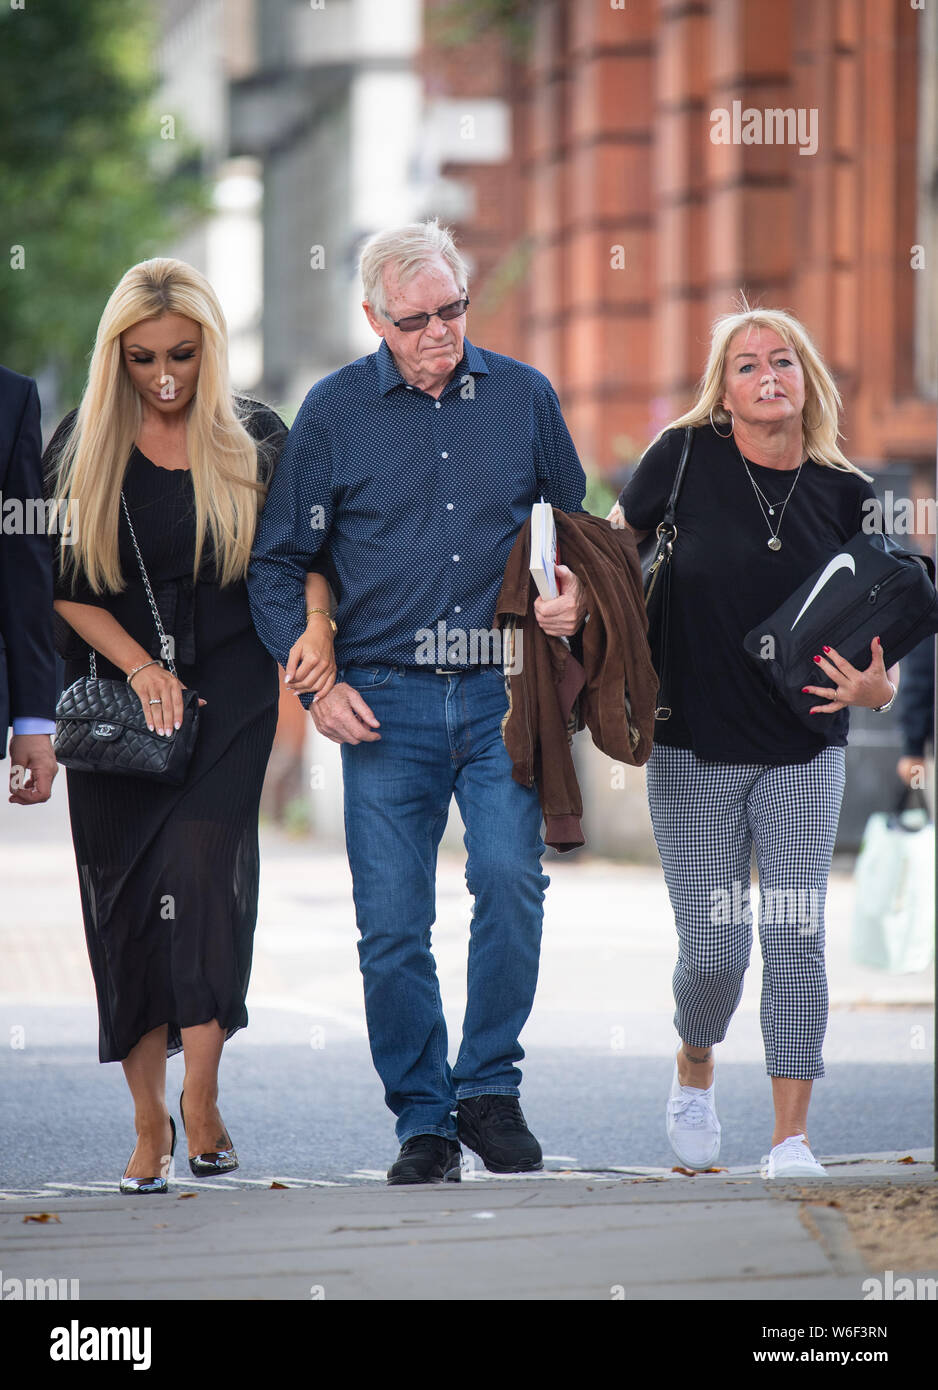 John 'Kenny' Collins (centre), ringleader of the Hatton Garden heist, arrives at Westminster Magistrates' Court, London, where he is set to hear if he will be sent back to jail for failing to pay back millions of pounds stolen in the raid. Stock Photo